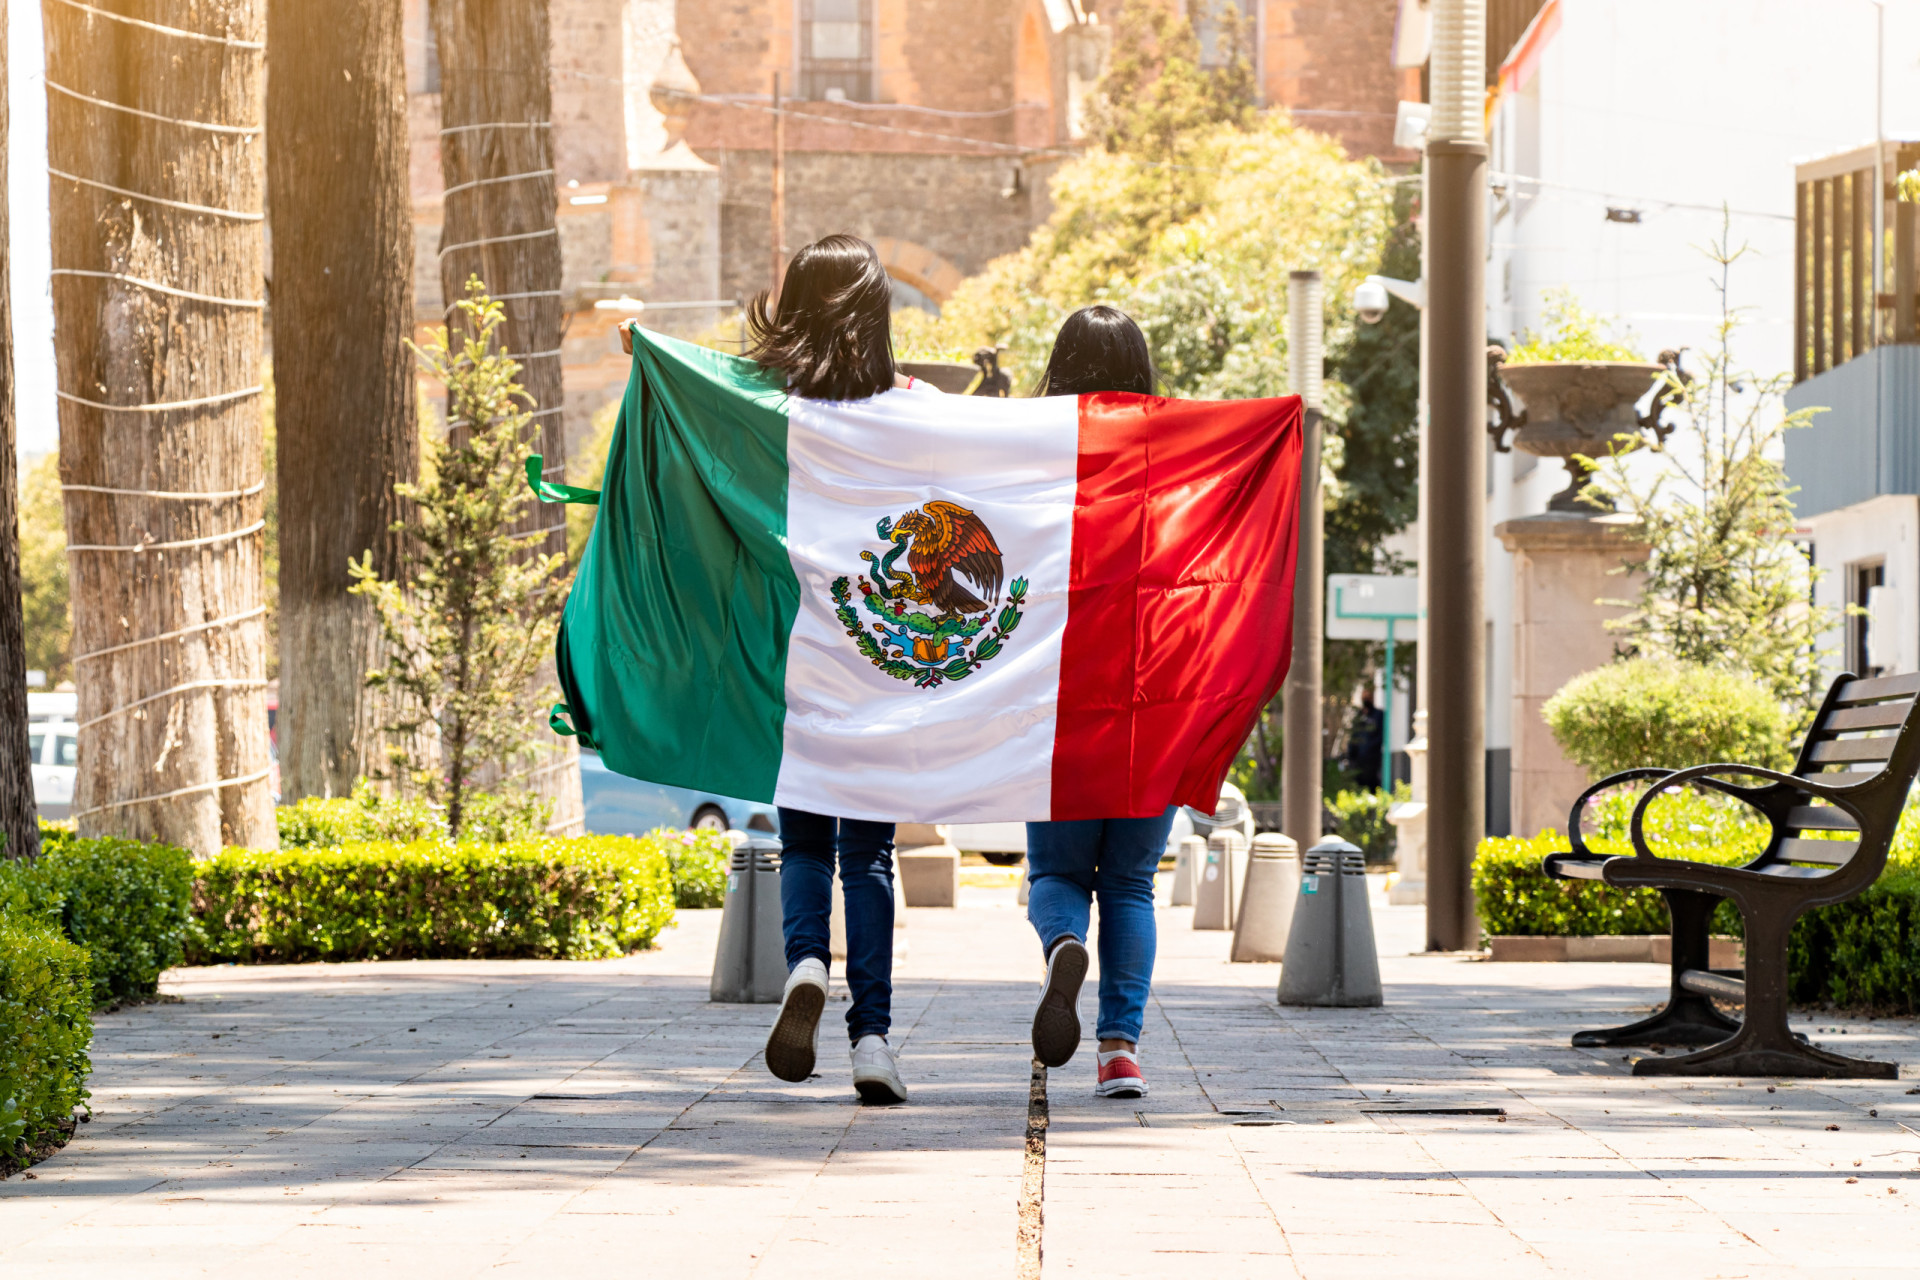 <p>Score: 6.678</p> <p>The country didn't make it into the top 30 last year, but things are looking better for Mexicans in 2024.</p><p><a href="https://www.msn.com/en-ca/community/channel/vid-7xx8mnucu55yw63we9va2gwr7uihbxwc68fxqp25x6tg4ftibpra?cvid=94631541bc0f4f89bfd59158d696ad7e">Follow us and access great exclusive content every day</a></p>